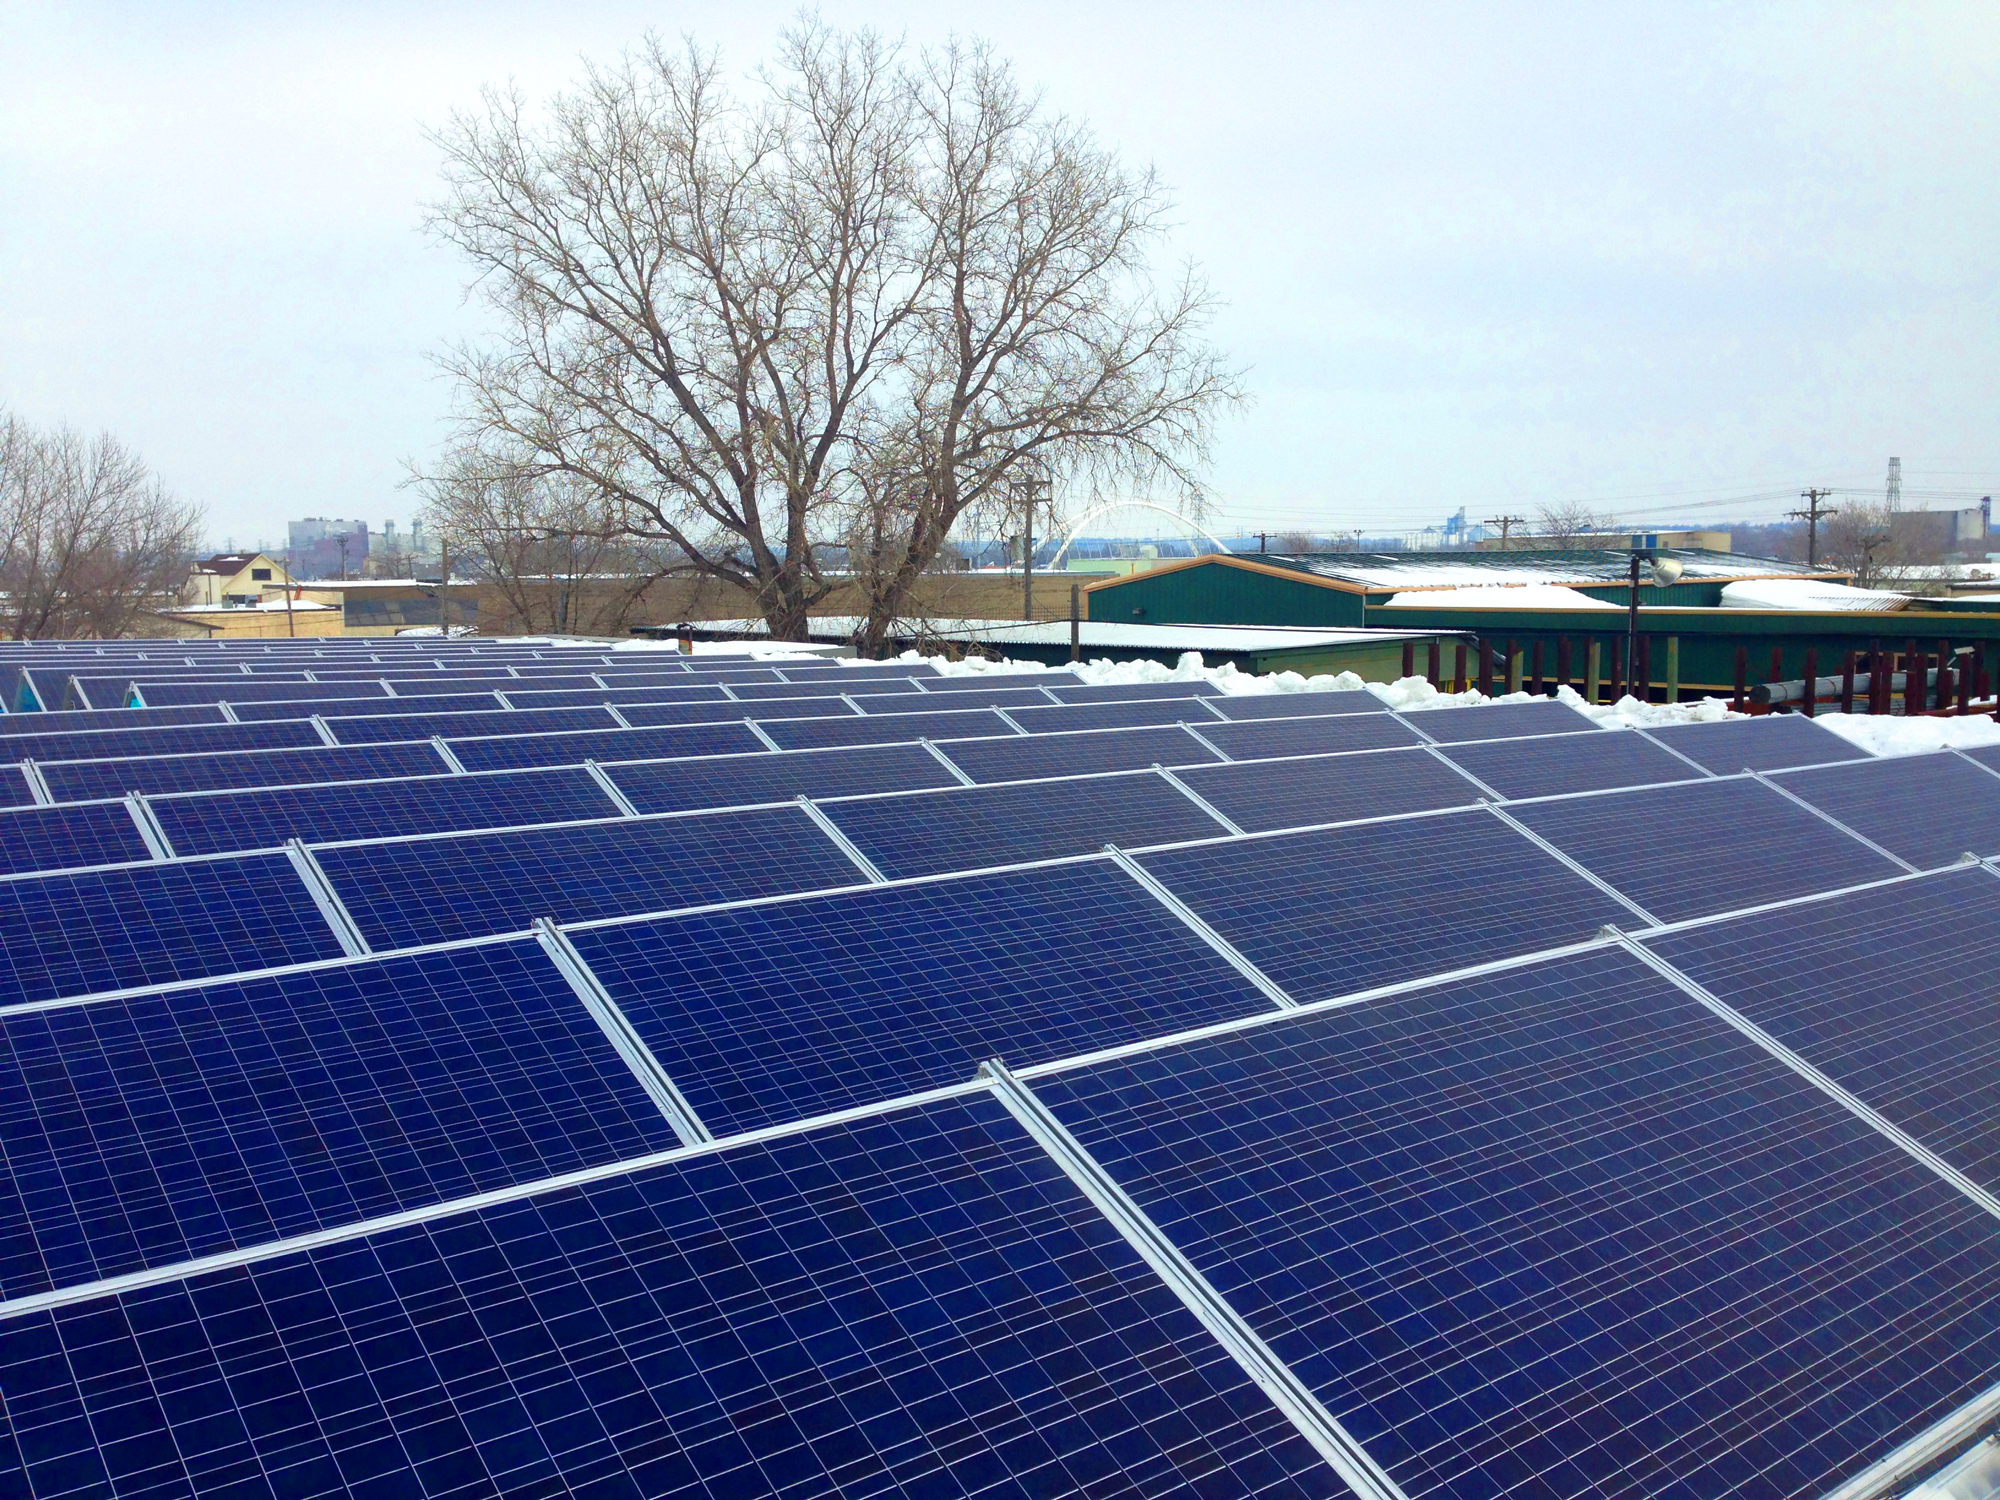 Solar Panels for Manufacturing and Distribution Centers in Minnesota | Cedar Creek Energy